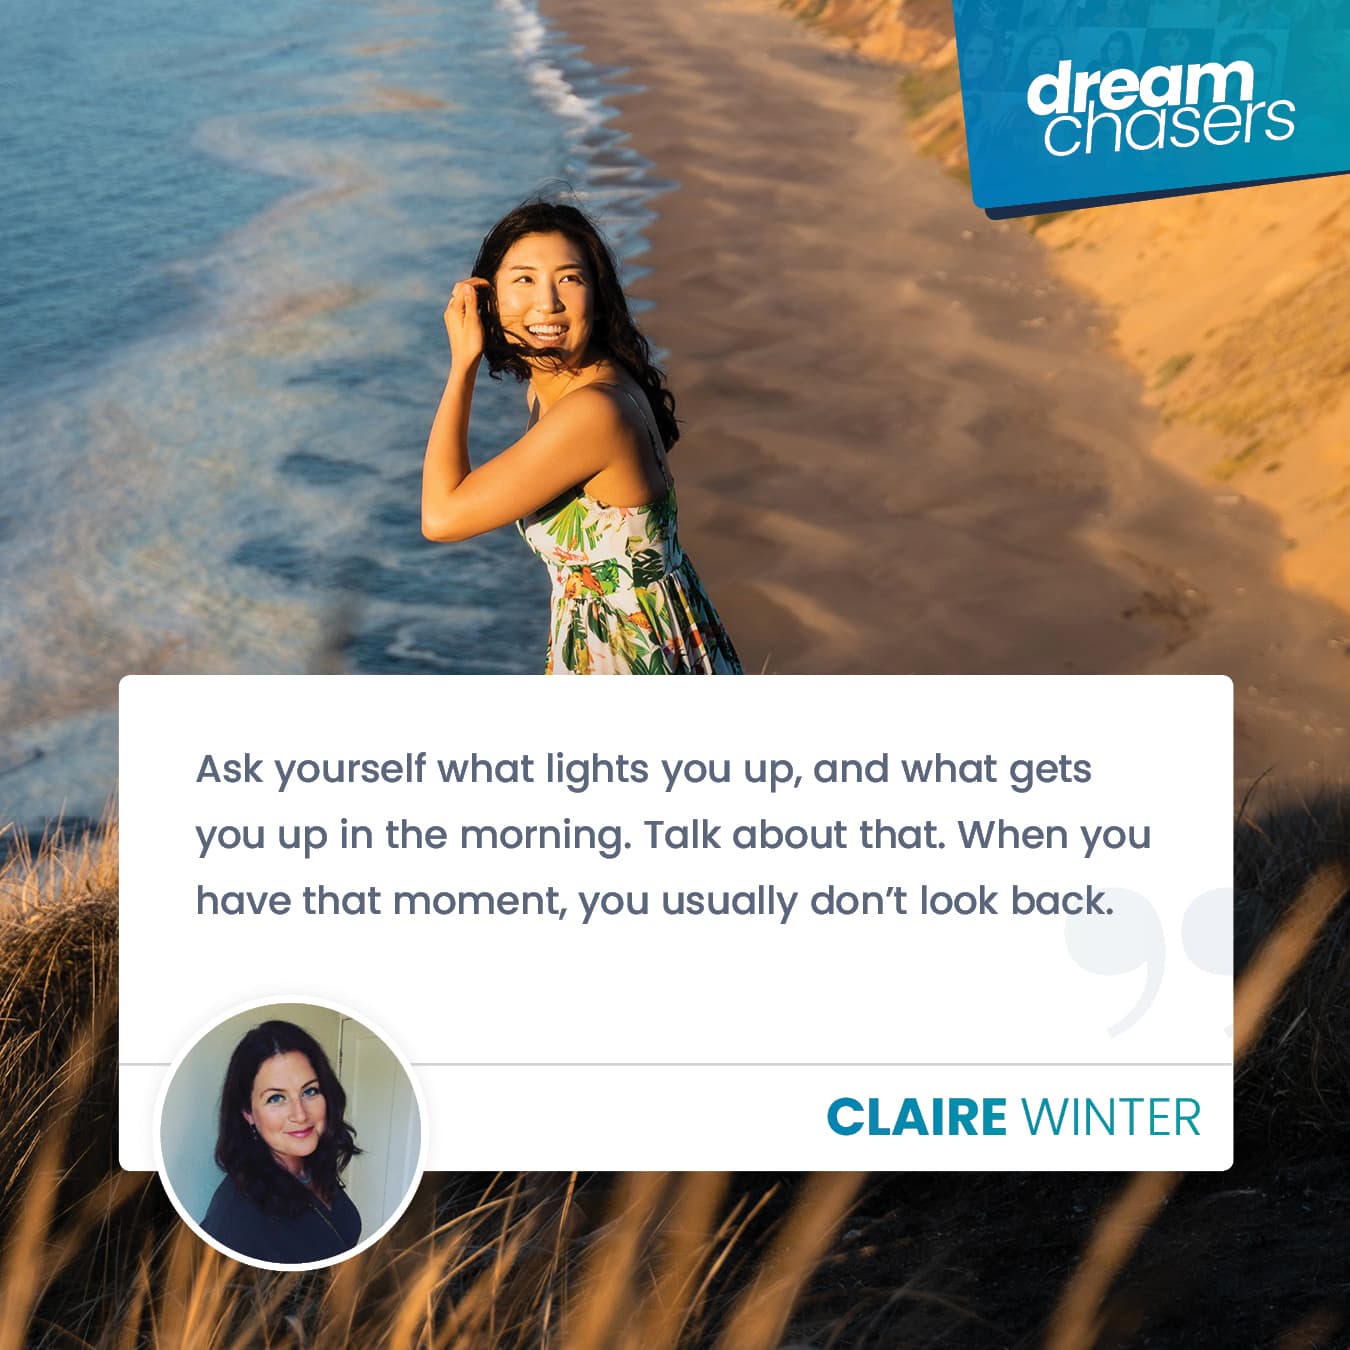 Why storytelling must be a part of your brand - with Claire Winter